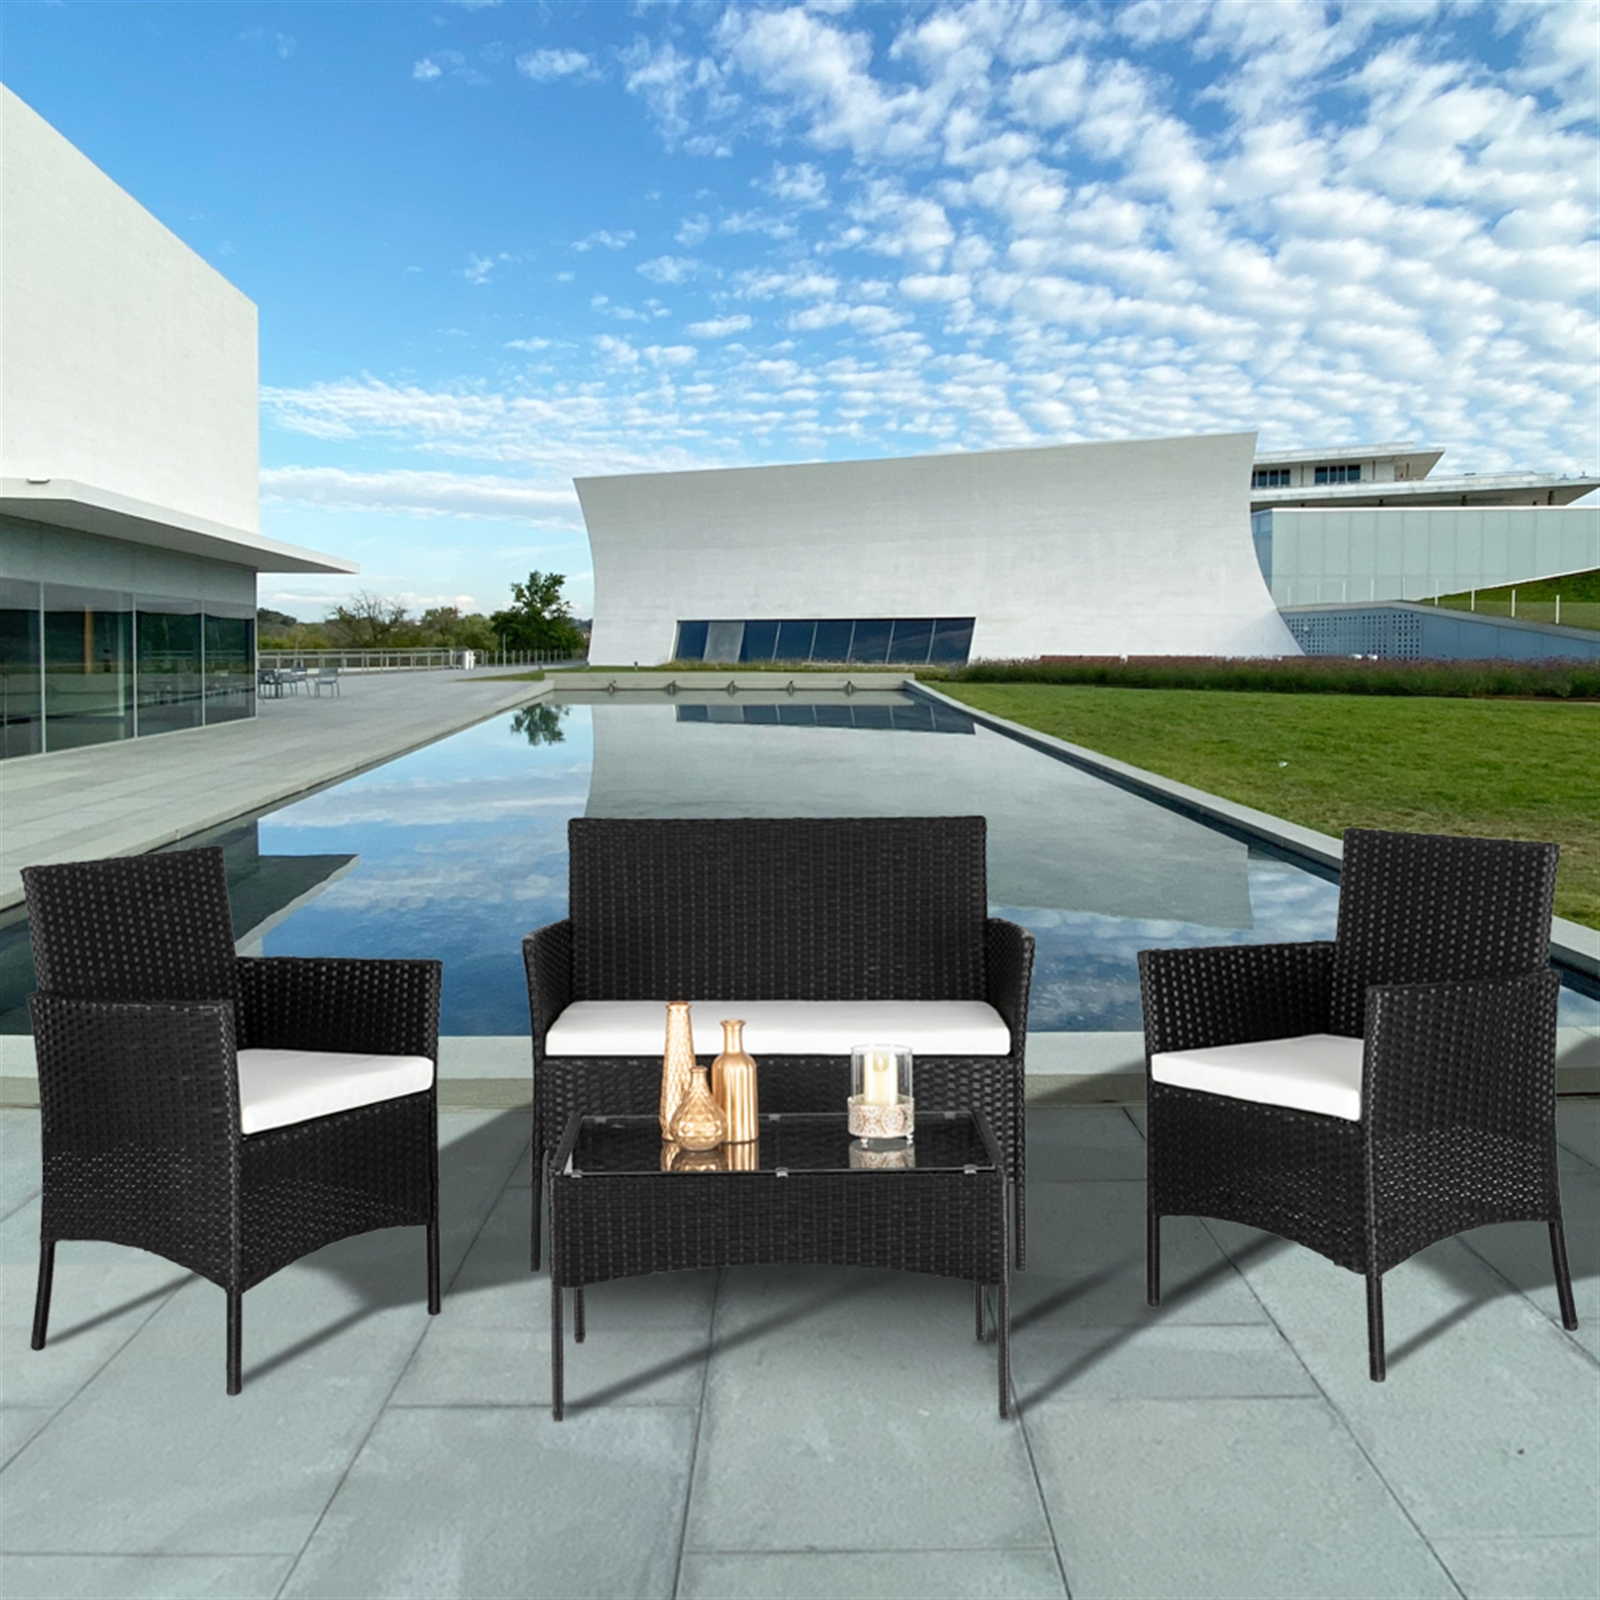 Patio Furniture Sets, MDHAND 4 Piece Wicker Patio Bar Set, 2 Arm Chairs, 1 Love Seat&Coffee Table, Outdoor Conversation Sets, Seating Set For Backyard Lawn Poolside Garden, White Cushions, VG03 - image 2 of 9